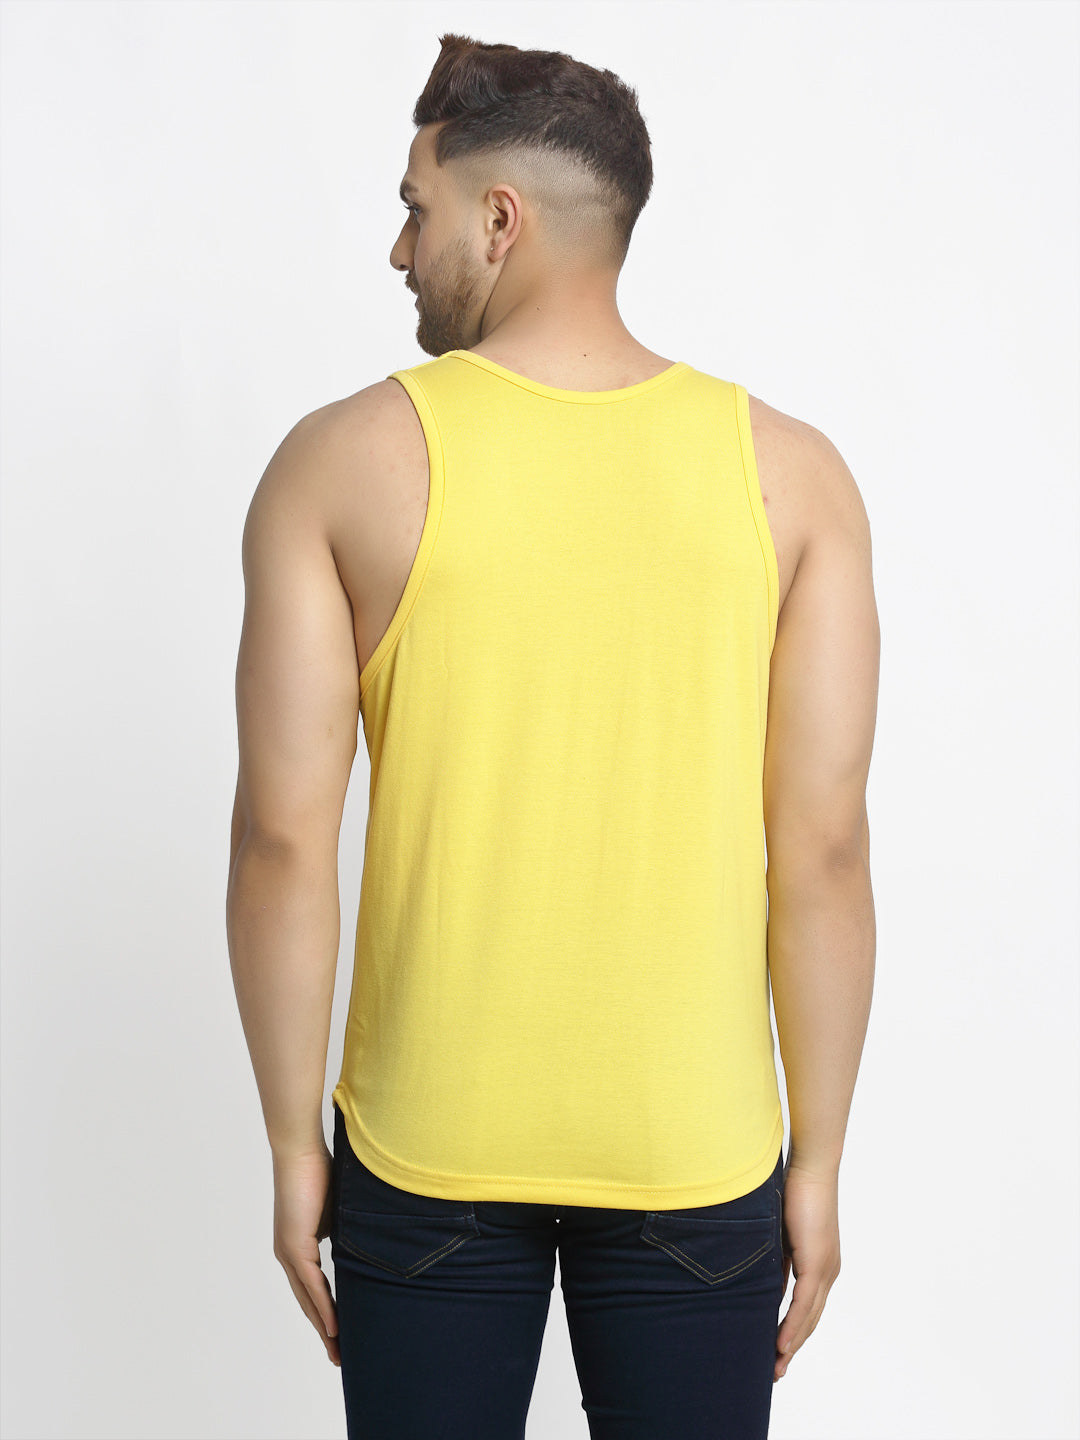 Men's Pack of 2 Yellow & Navy Printed Gym Vest - Friskers